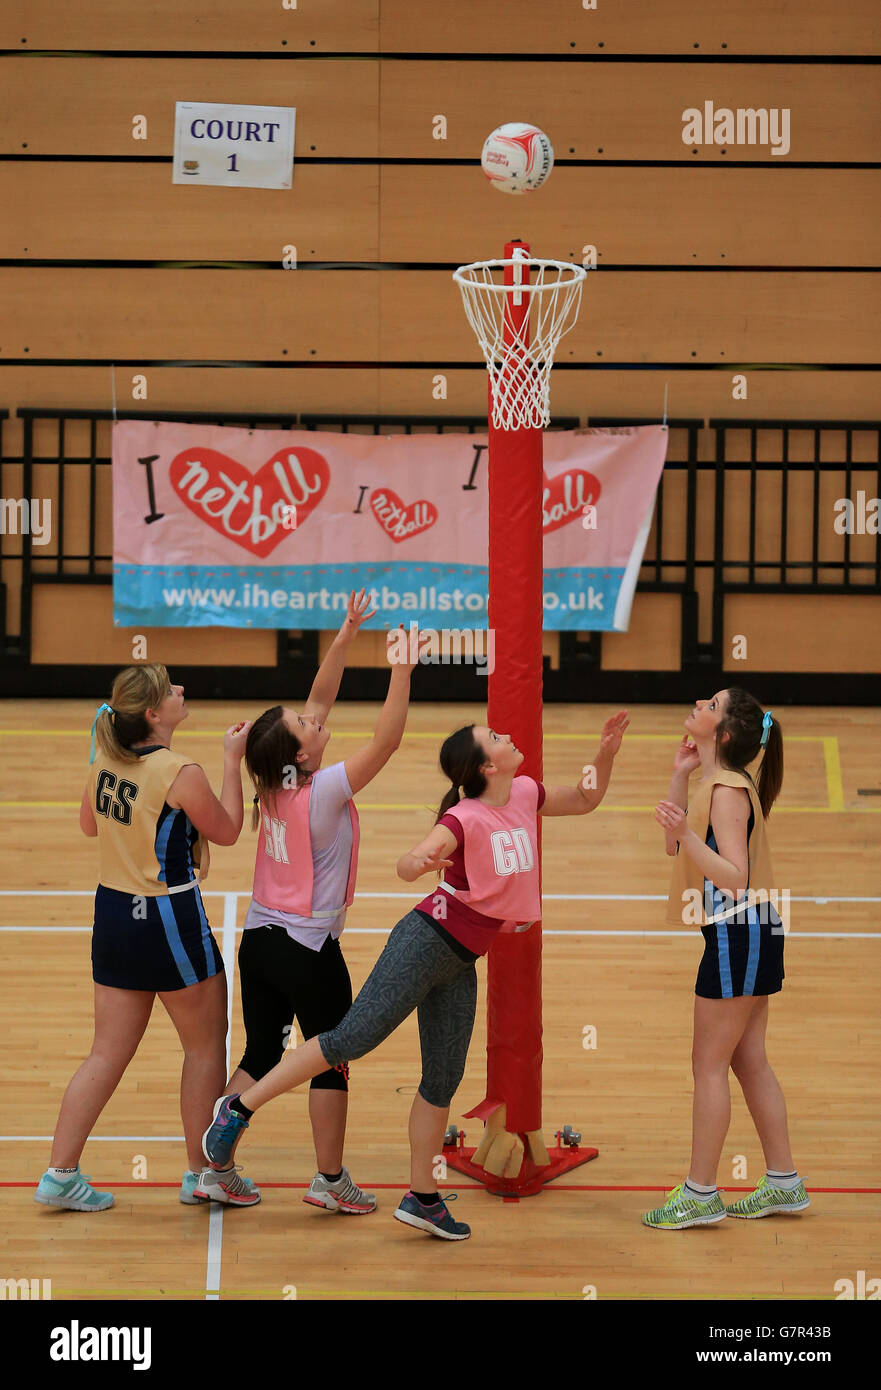 Netball - Netball in the City - Copper Box Arena. General action from a match underway during the Netball in the City event at the Copper Box Arena, London Stock Photo